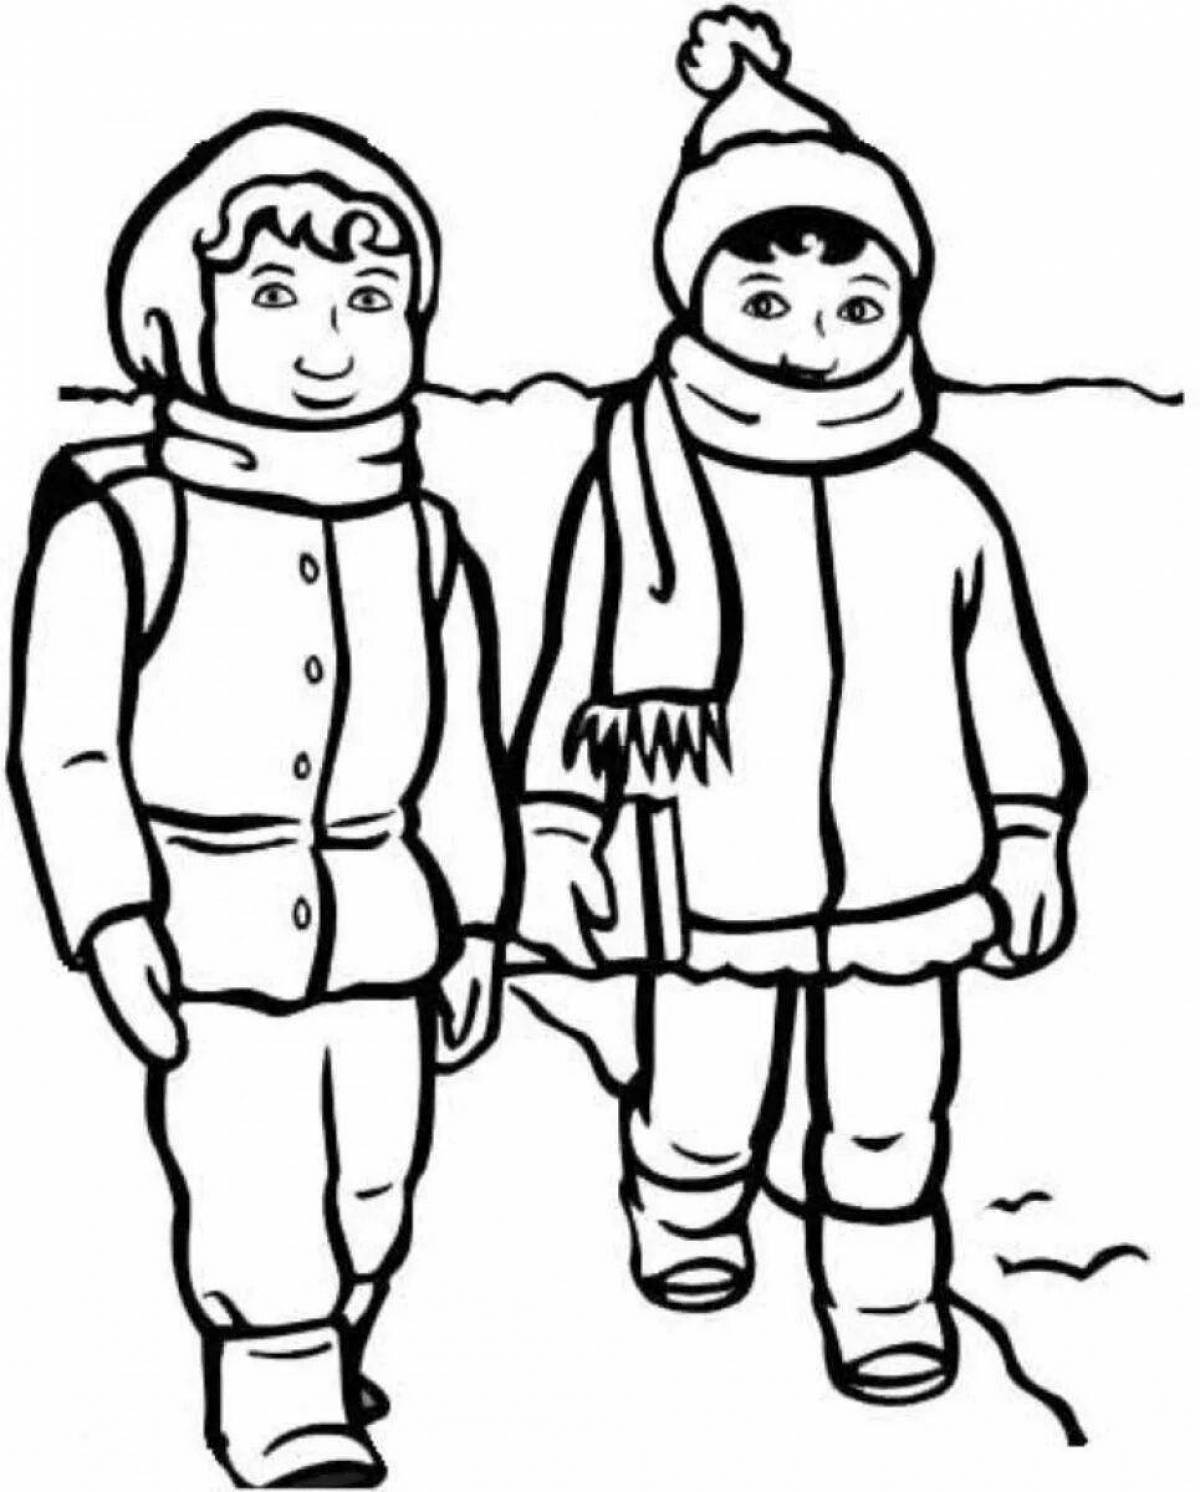 Amazing coloring pages for kids outdoors in winter